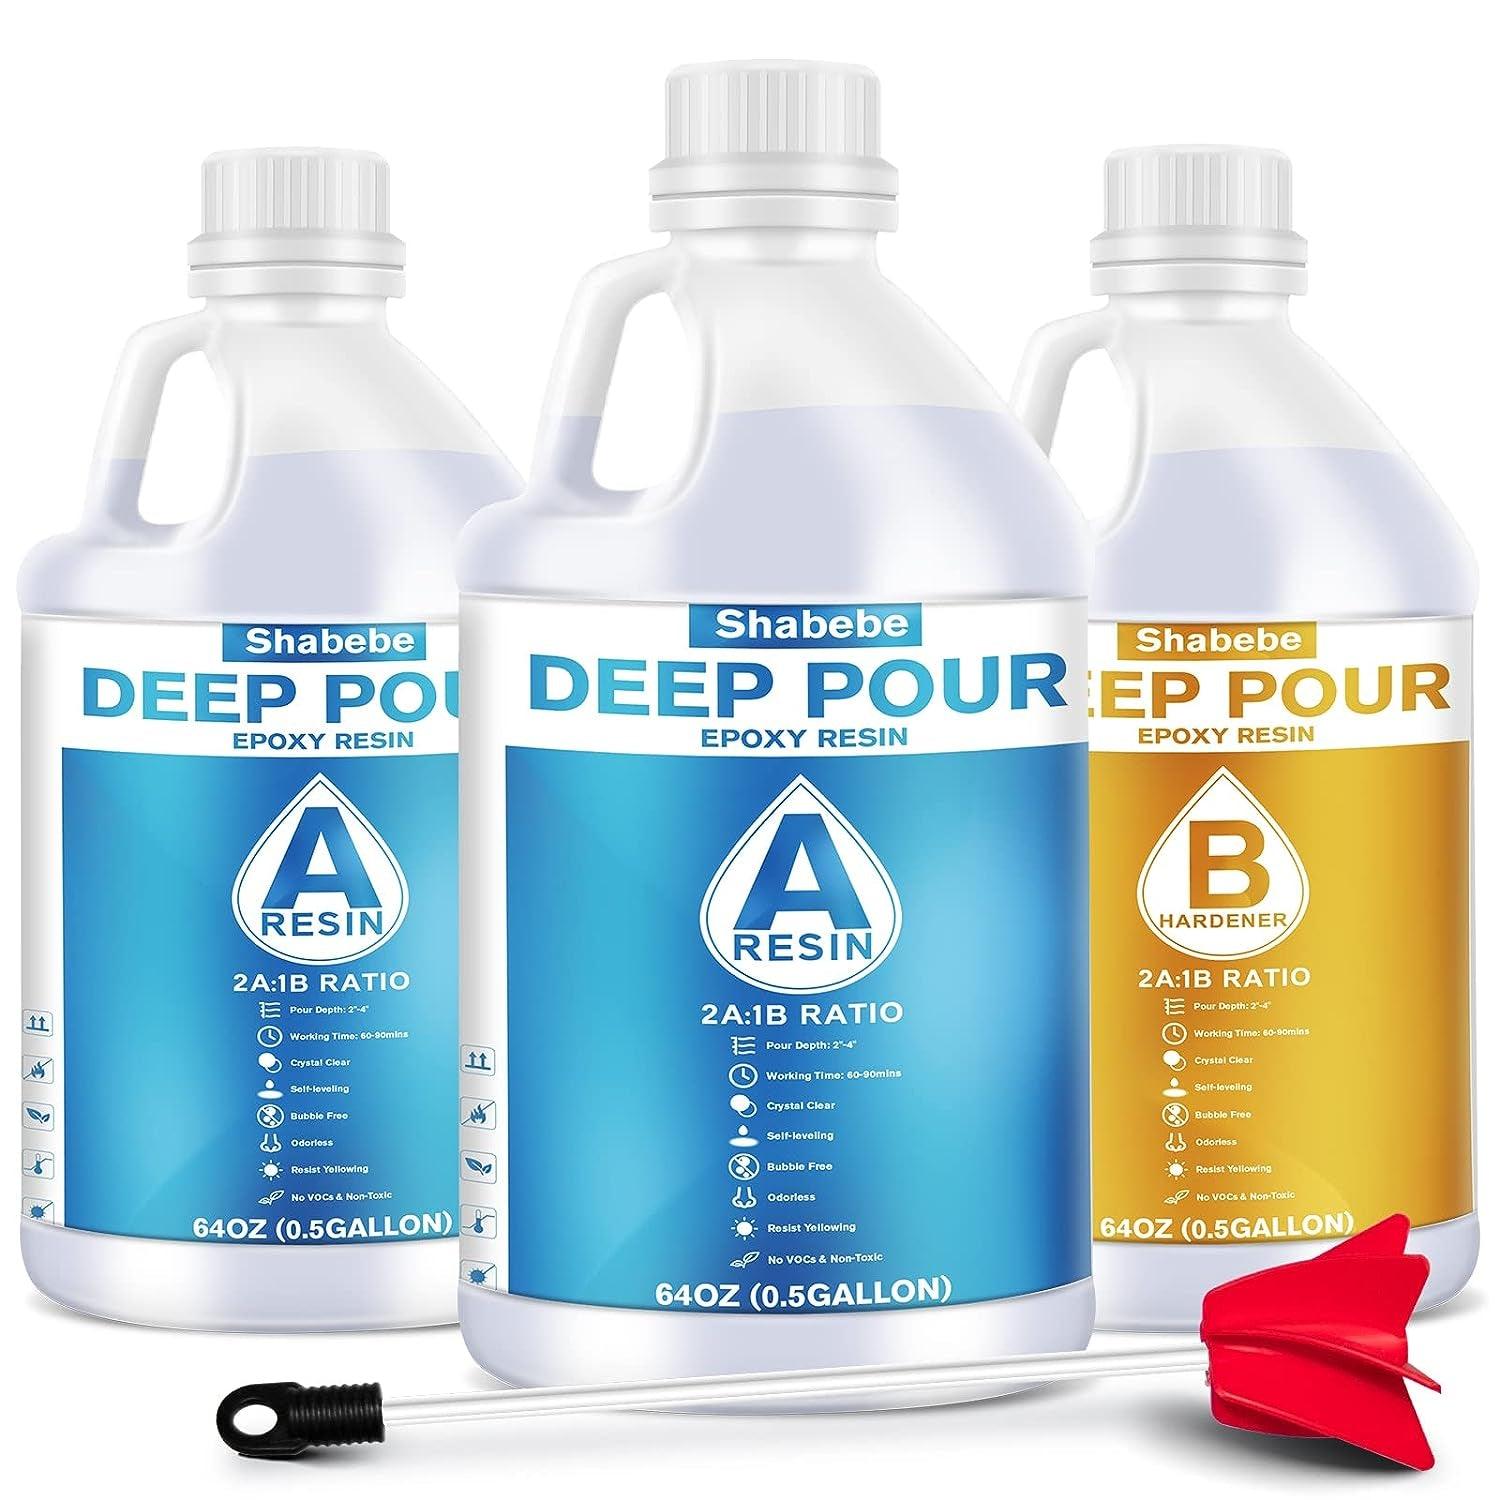 Deep Pour Epoxy Resin 1.5 Gallon, 2 to 4 Inch Depth Clear Epoxy Resin Kit  with Mixer, Bubble Free, Low Odor 2:1 Casting Resin for Table Top